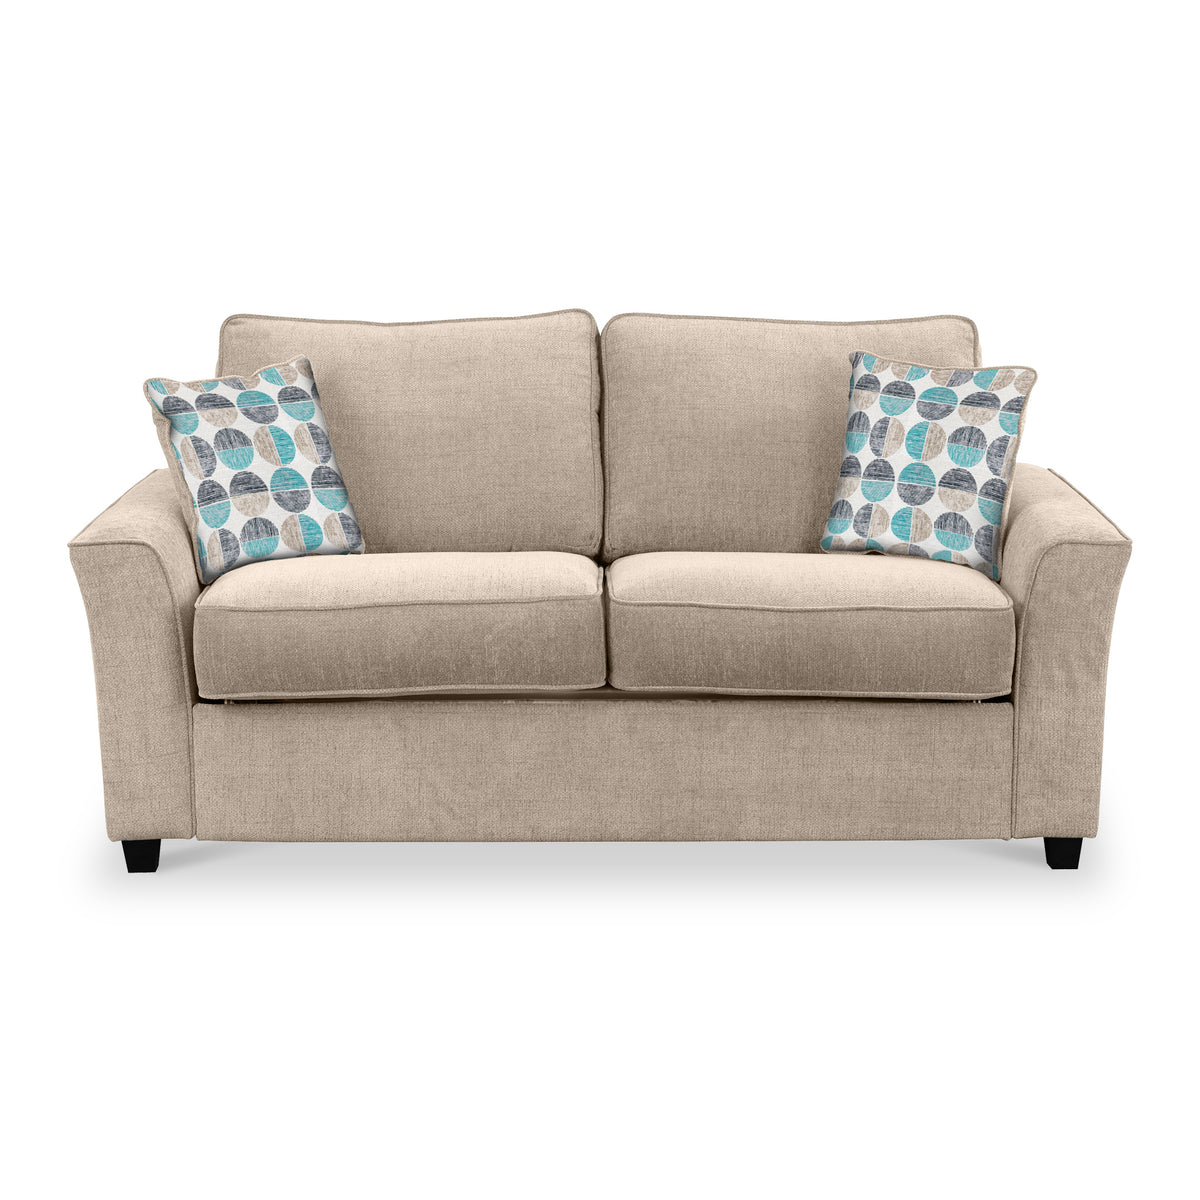 Abbott 2 Seater Sofabed in Oatmeal with Rufus Duck Egg Cushions by Roseland Furniture